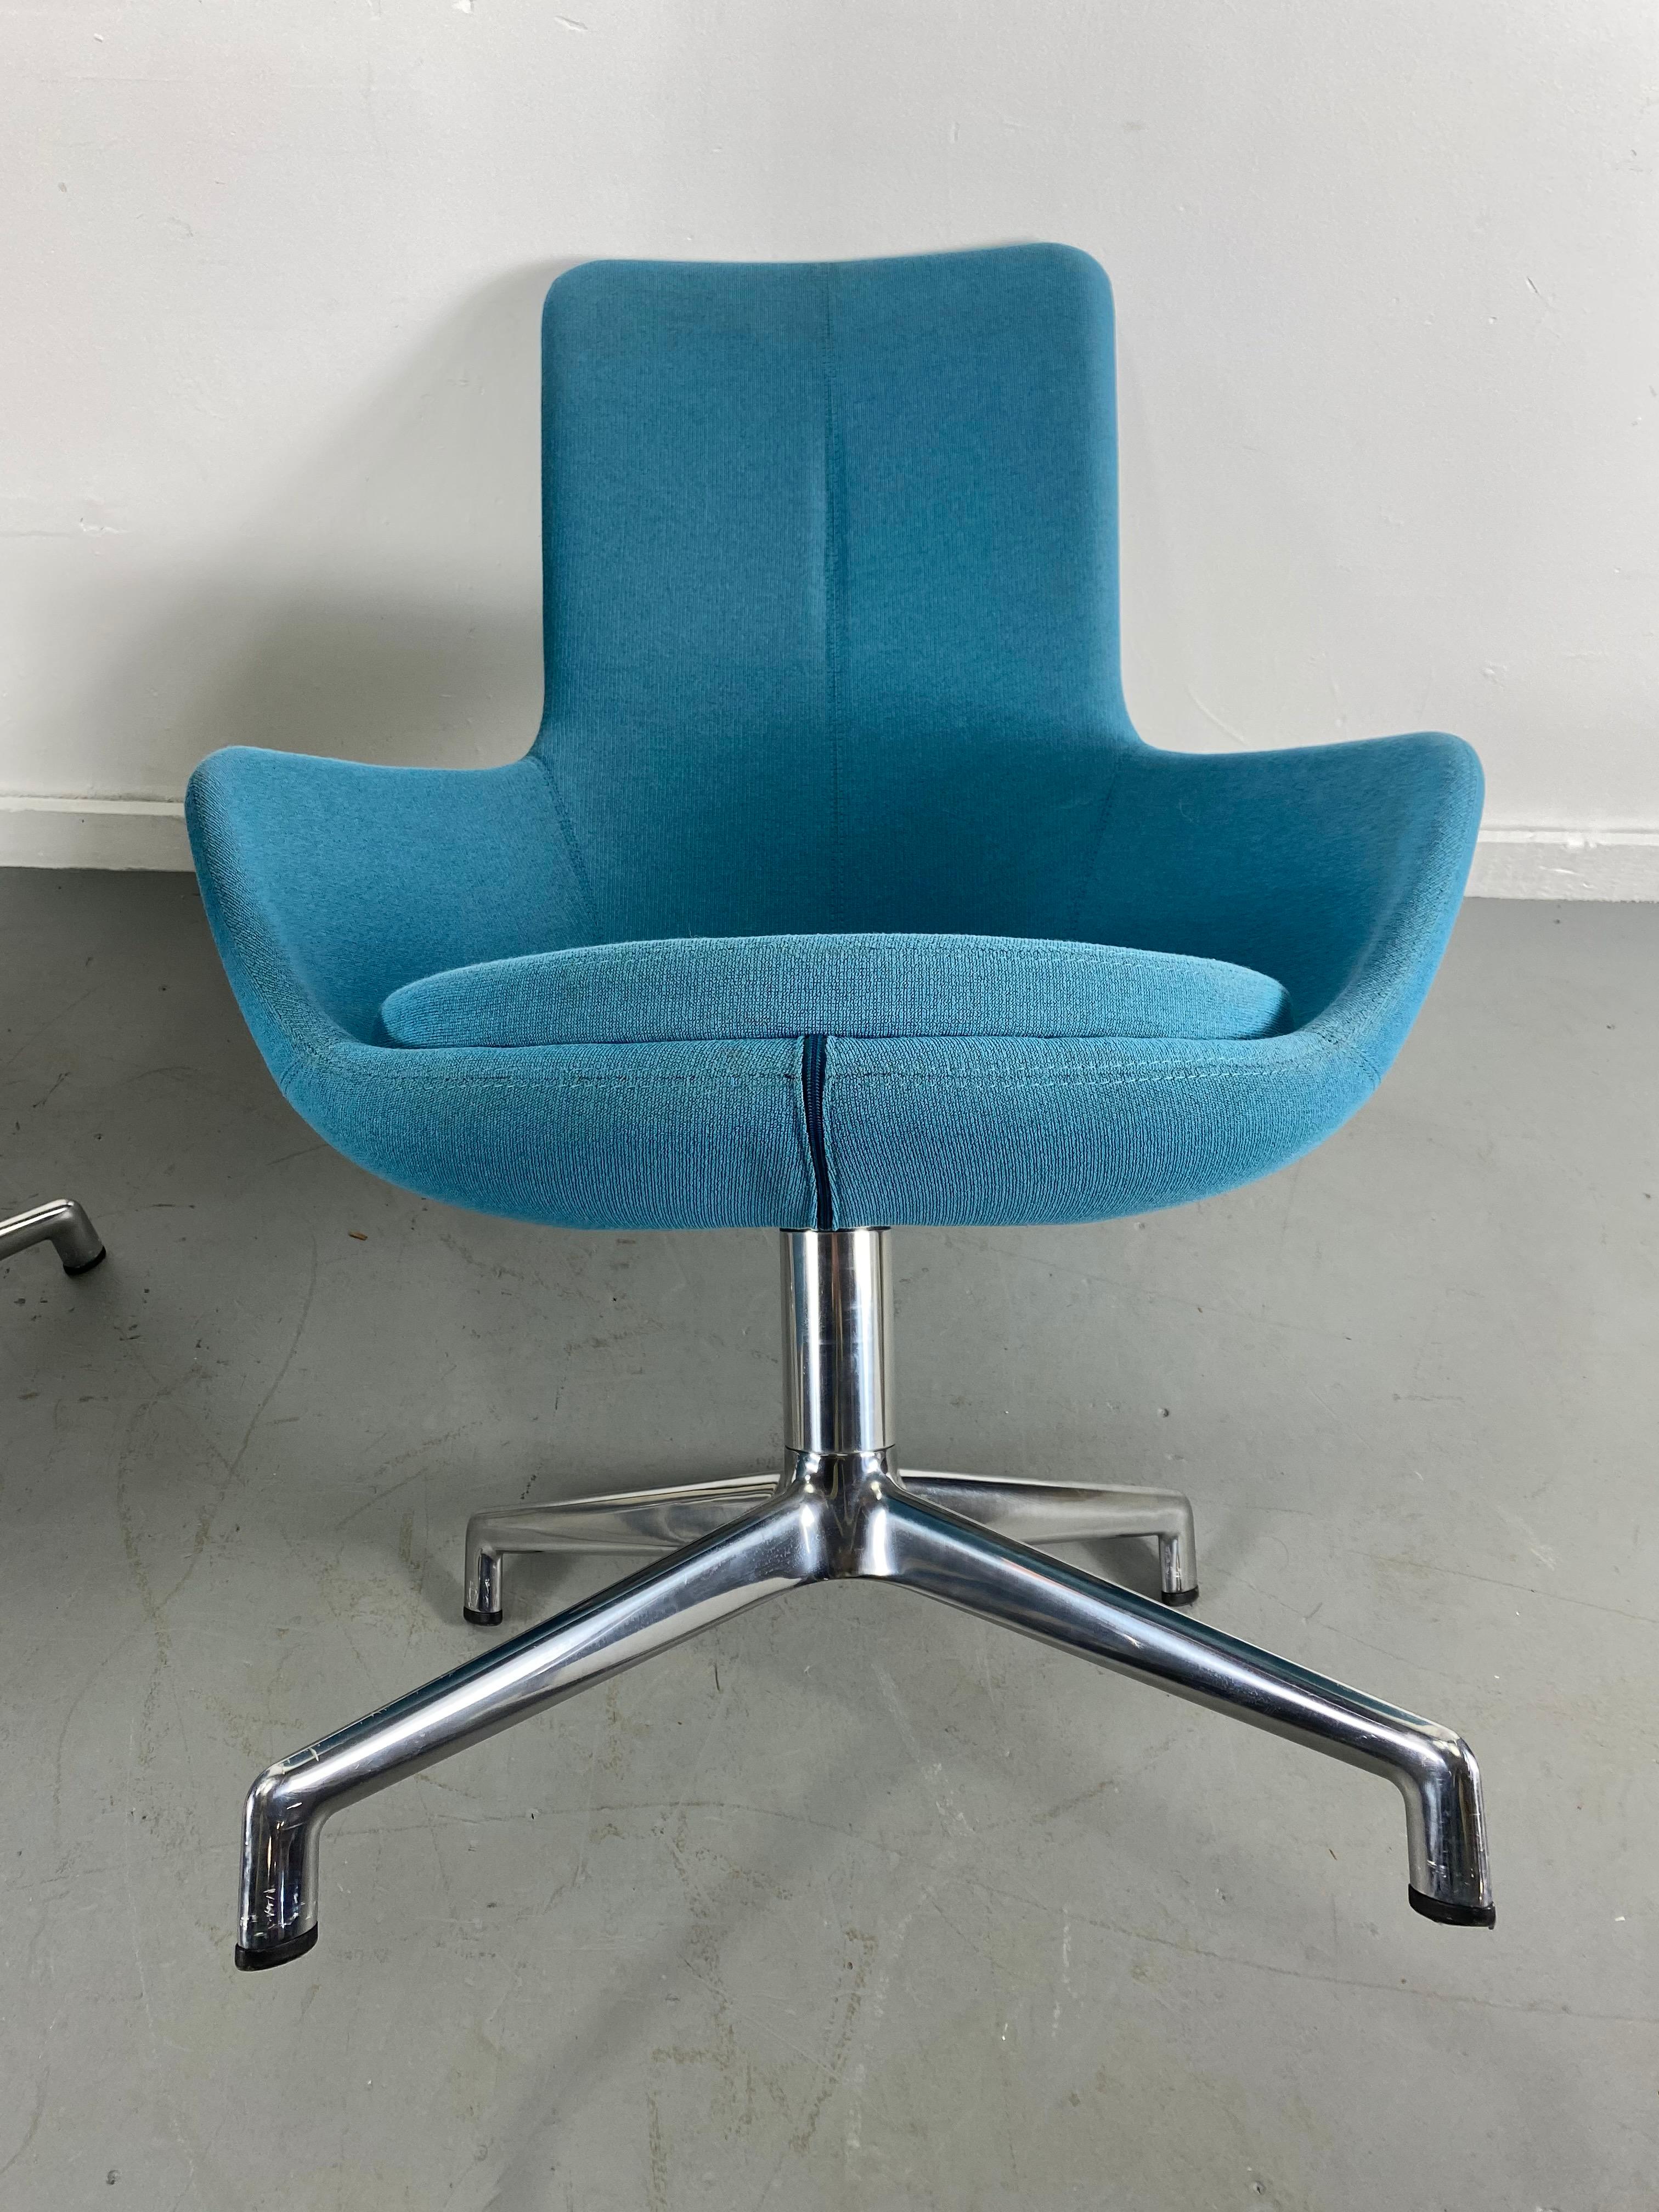 Pair of Post Modernist Lounge Chairs, Juxta Chair by Keilhauer 1